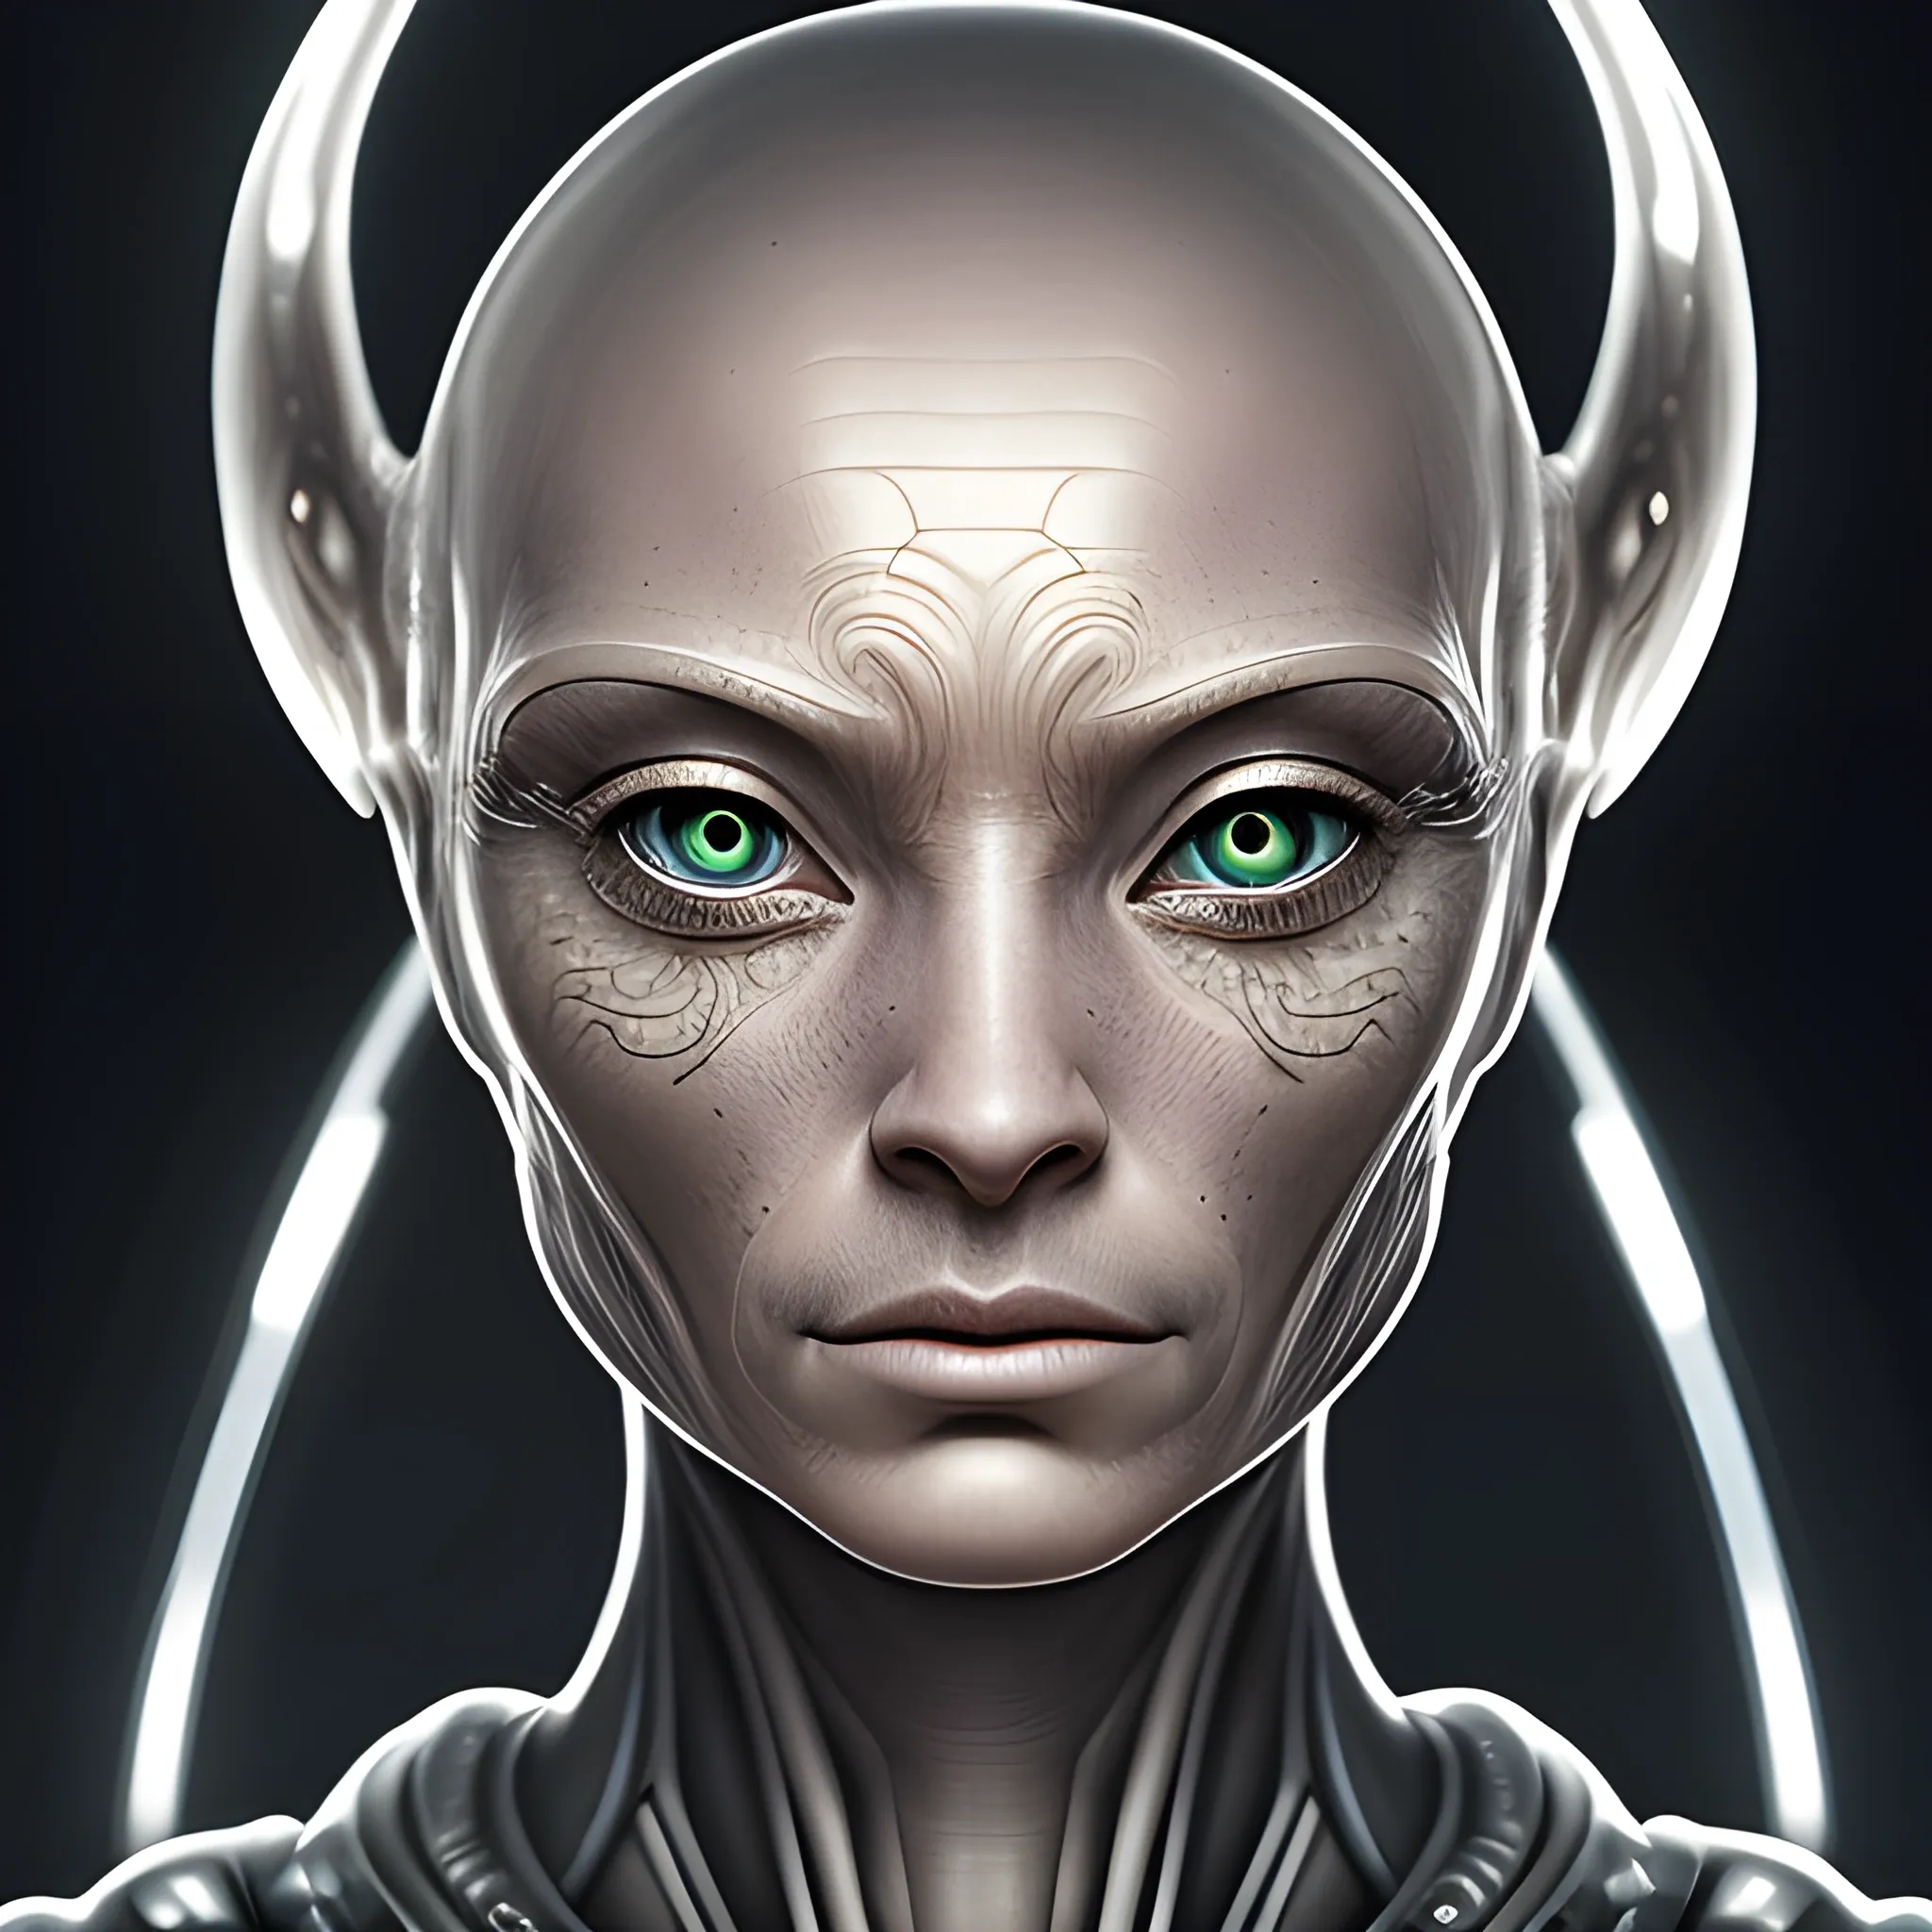 A detailed and intricate digital art piece in a cinematic style, this ultra high resolution portrait of an alien civilian is a true masterpiece